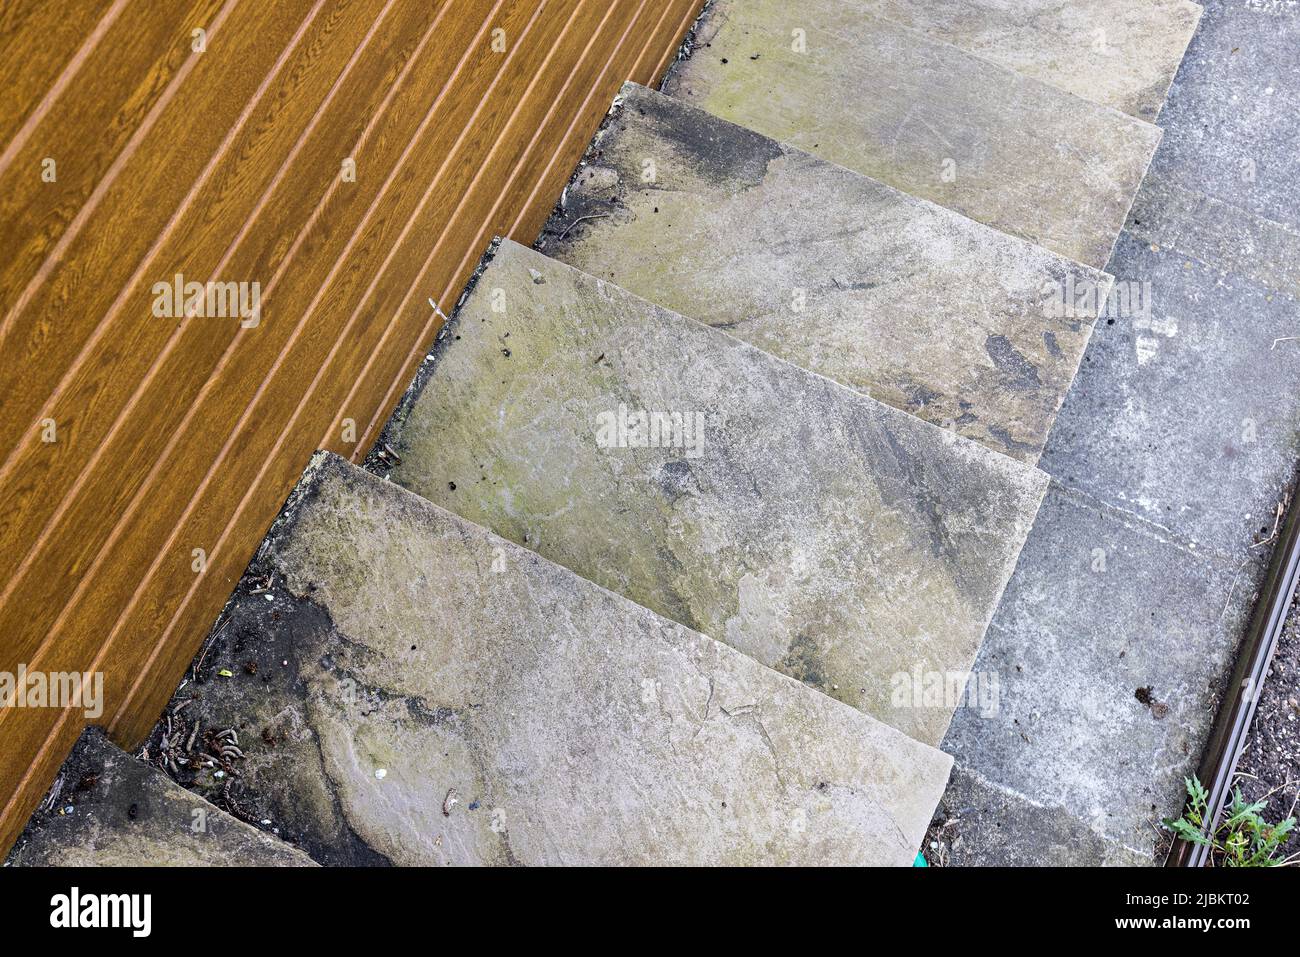 Indian sandstone steps discoloured with algae requiring cleaning, Wales, UK Stock Photo